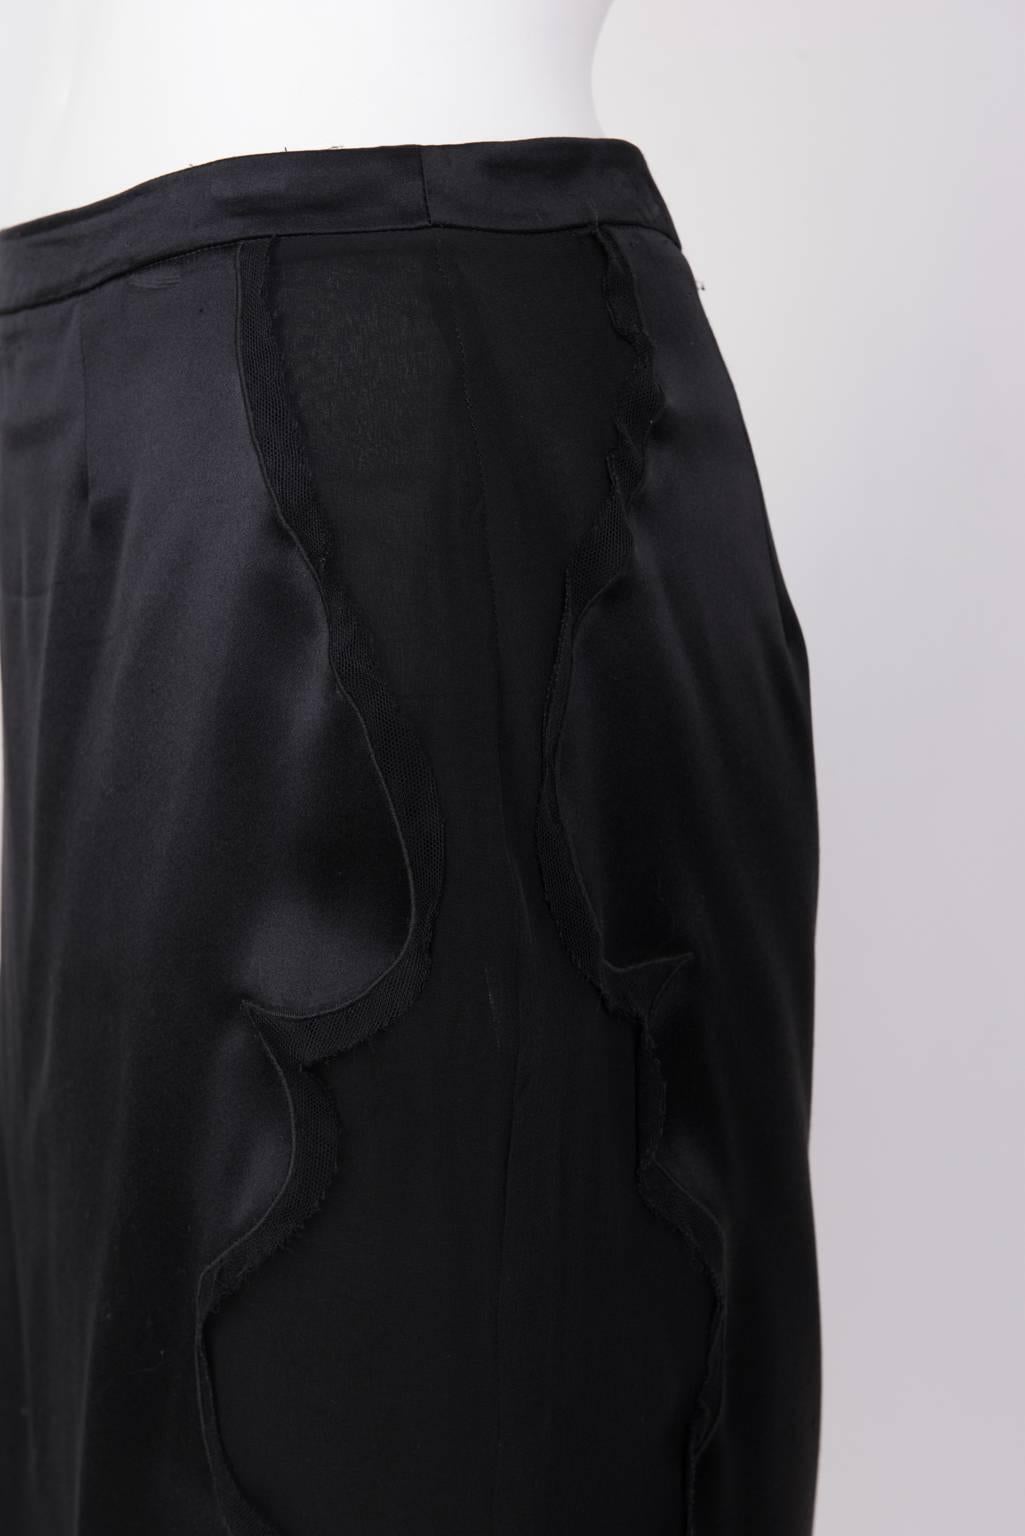 YVES SAINT LAURENT Pencil Skirt In Black Satin And Silk Crepe For Sale 1